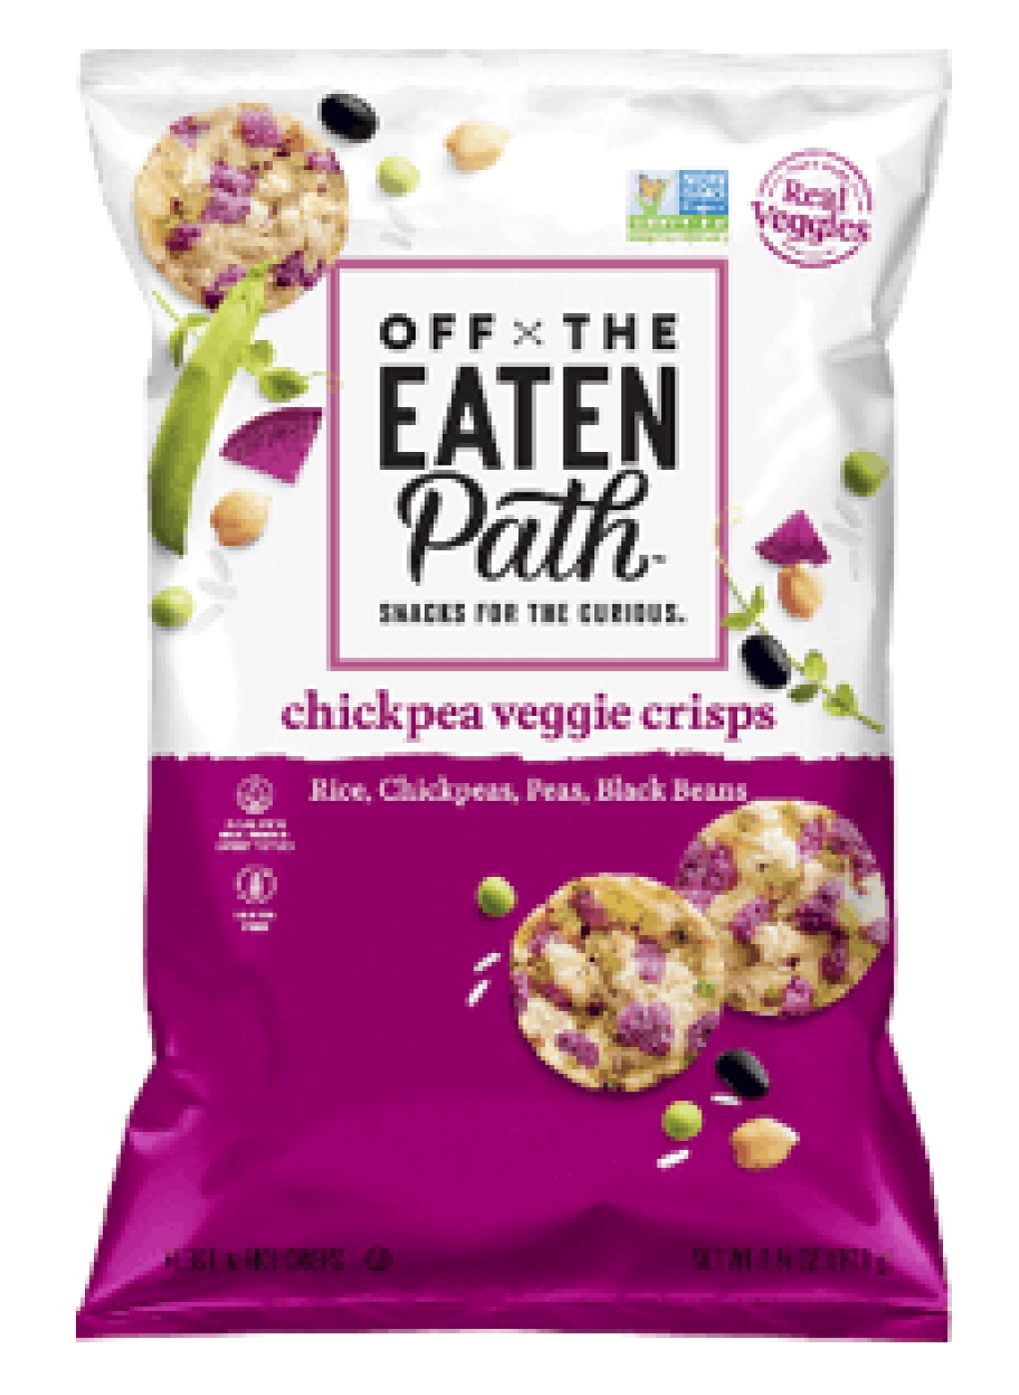 frito-lay-off-the-eaten-path-recall.png